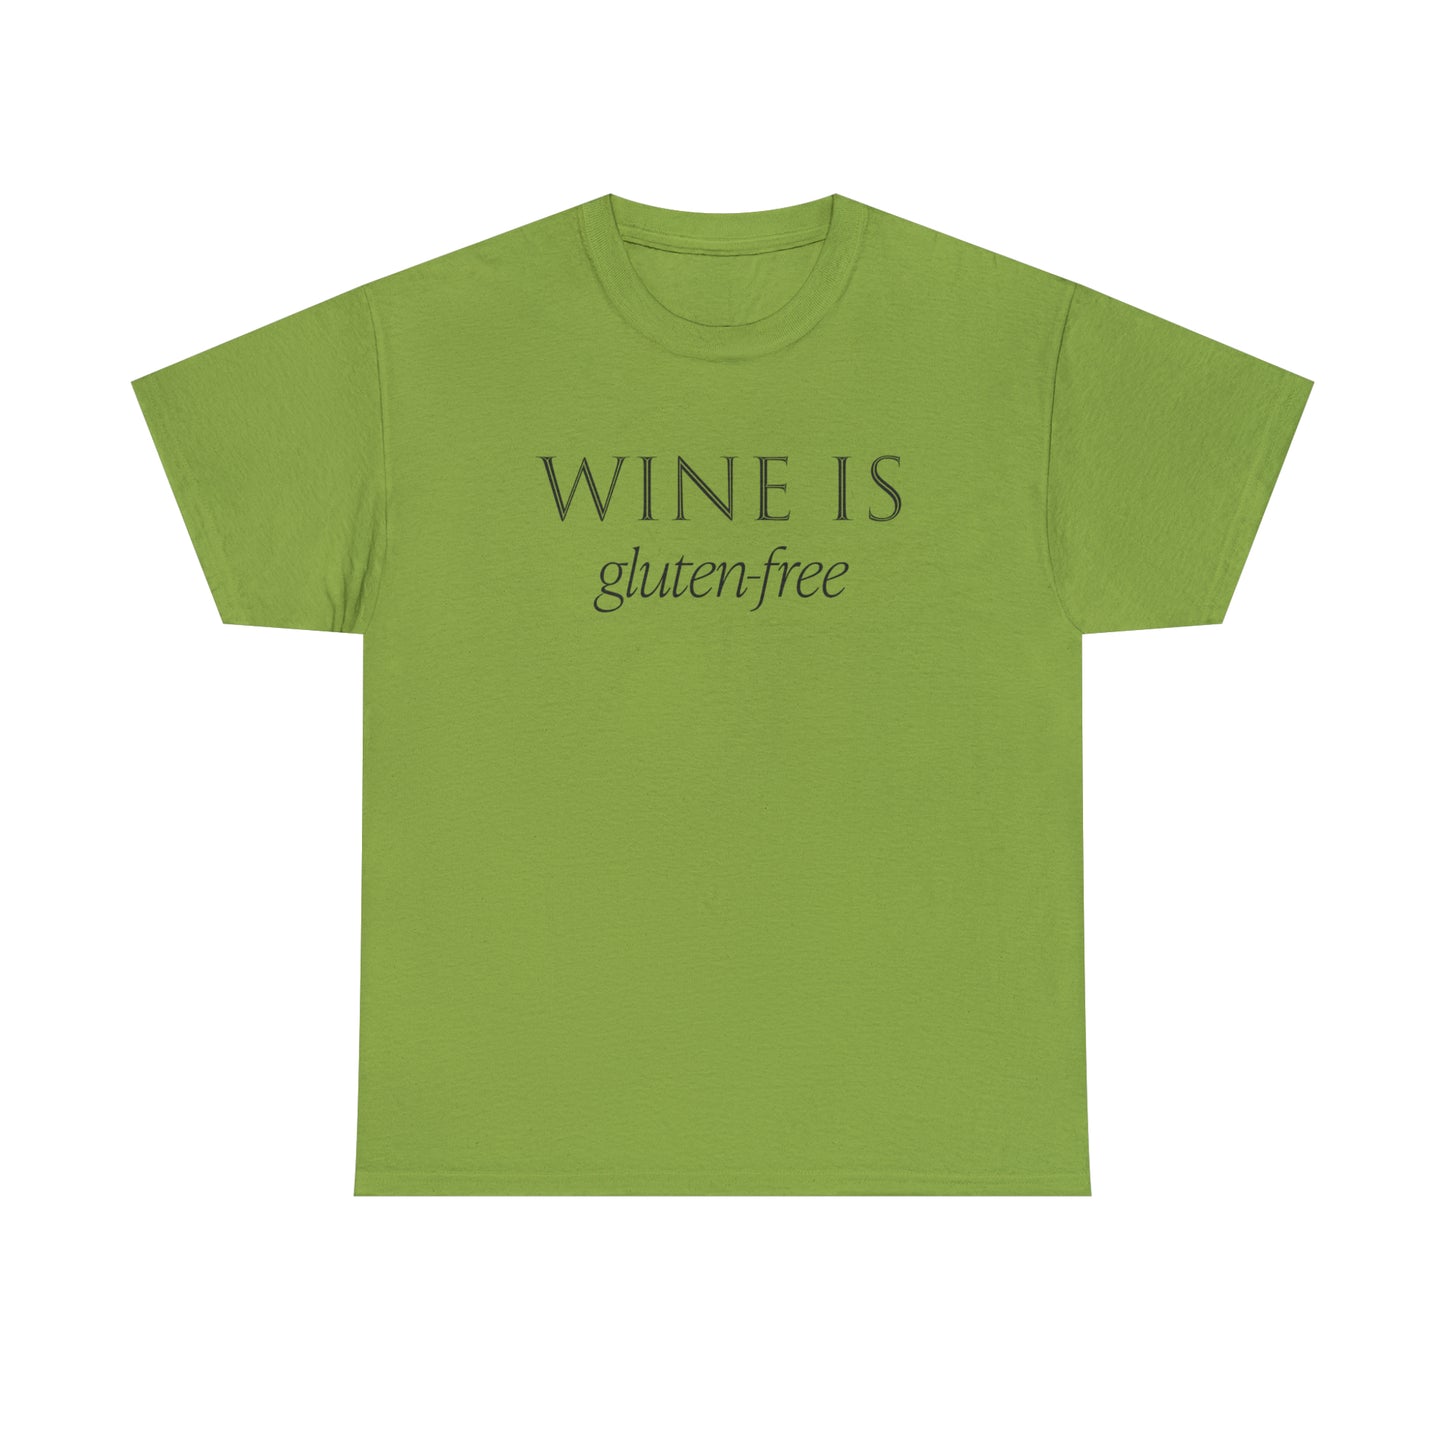 Wine T-Shirt For Gluten Free Wine T Shirt For Sarcastic Wine TShirt For Funny Wine Tee